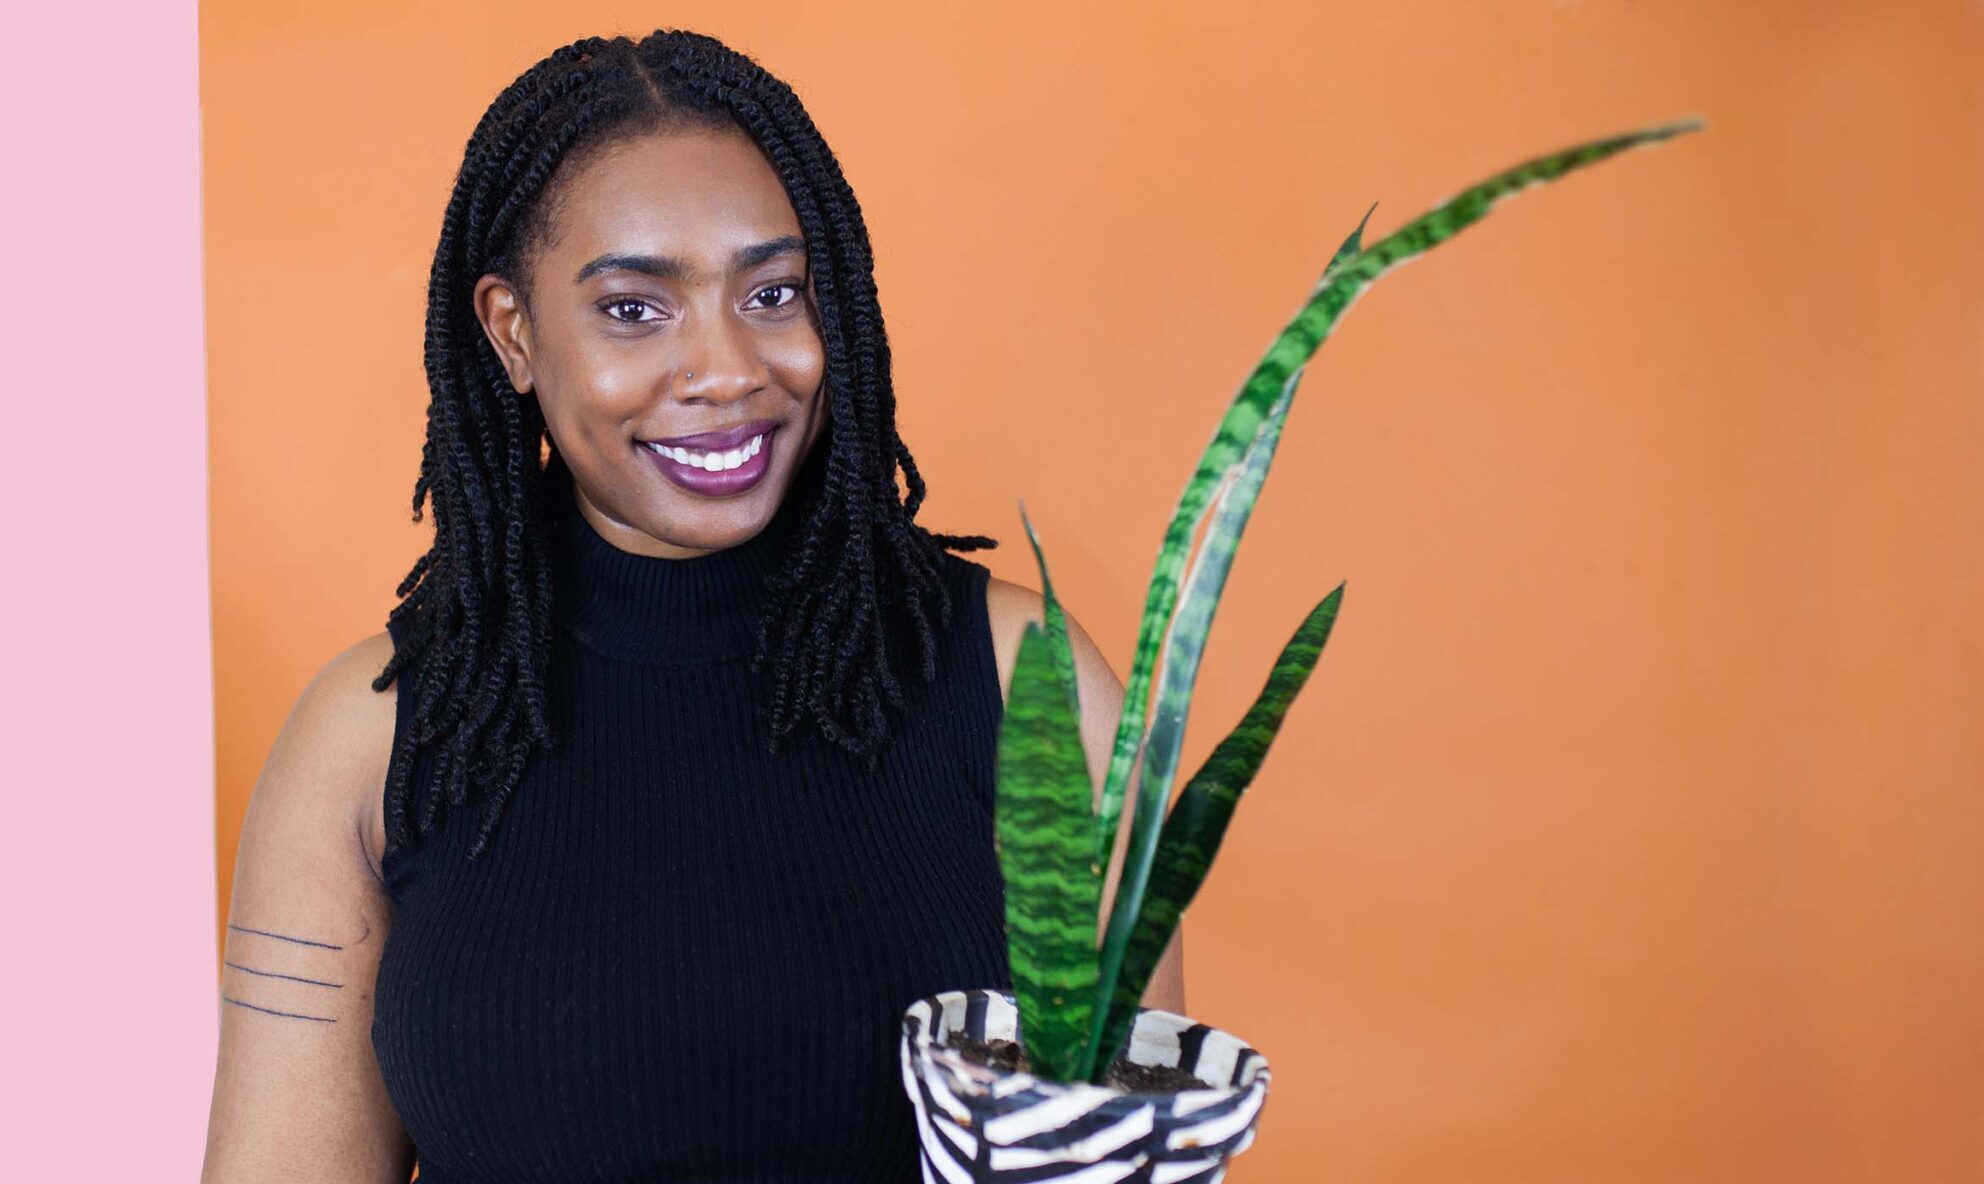 Quantese Winters stands in front of a pink and orange wall smiling and holding a houseplant